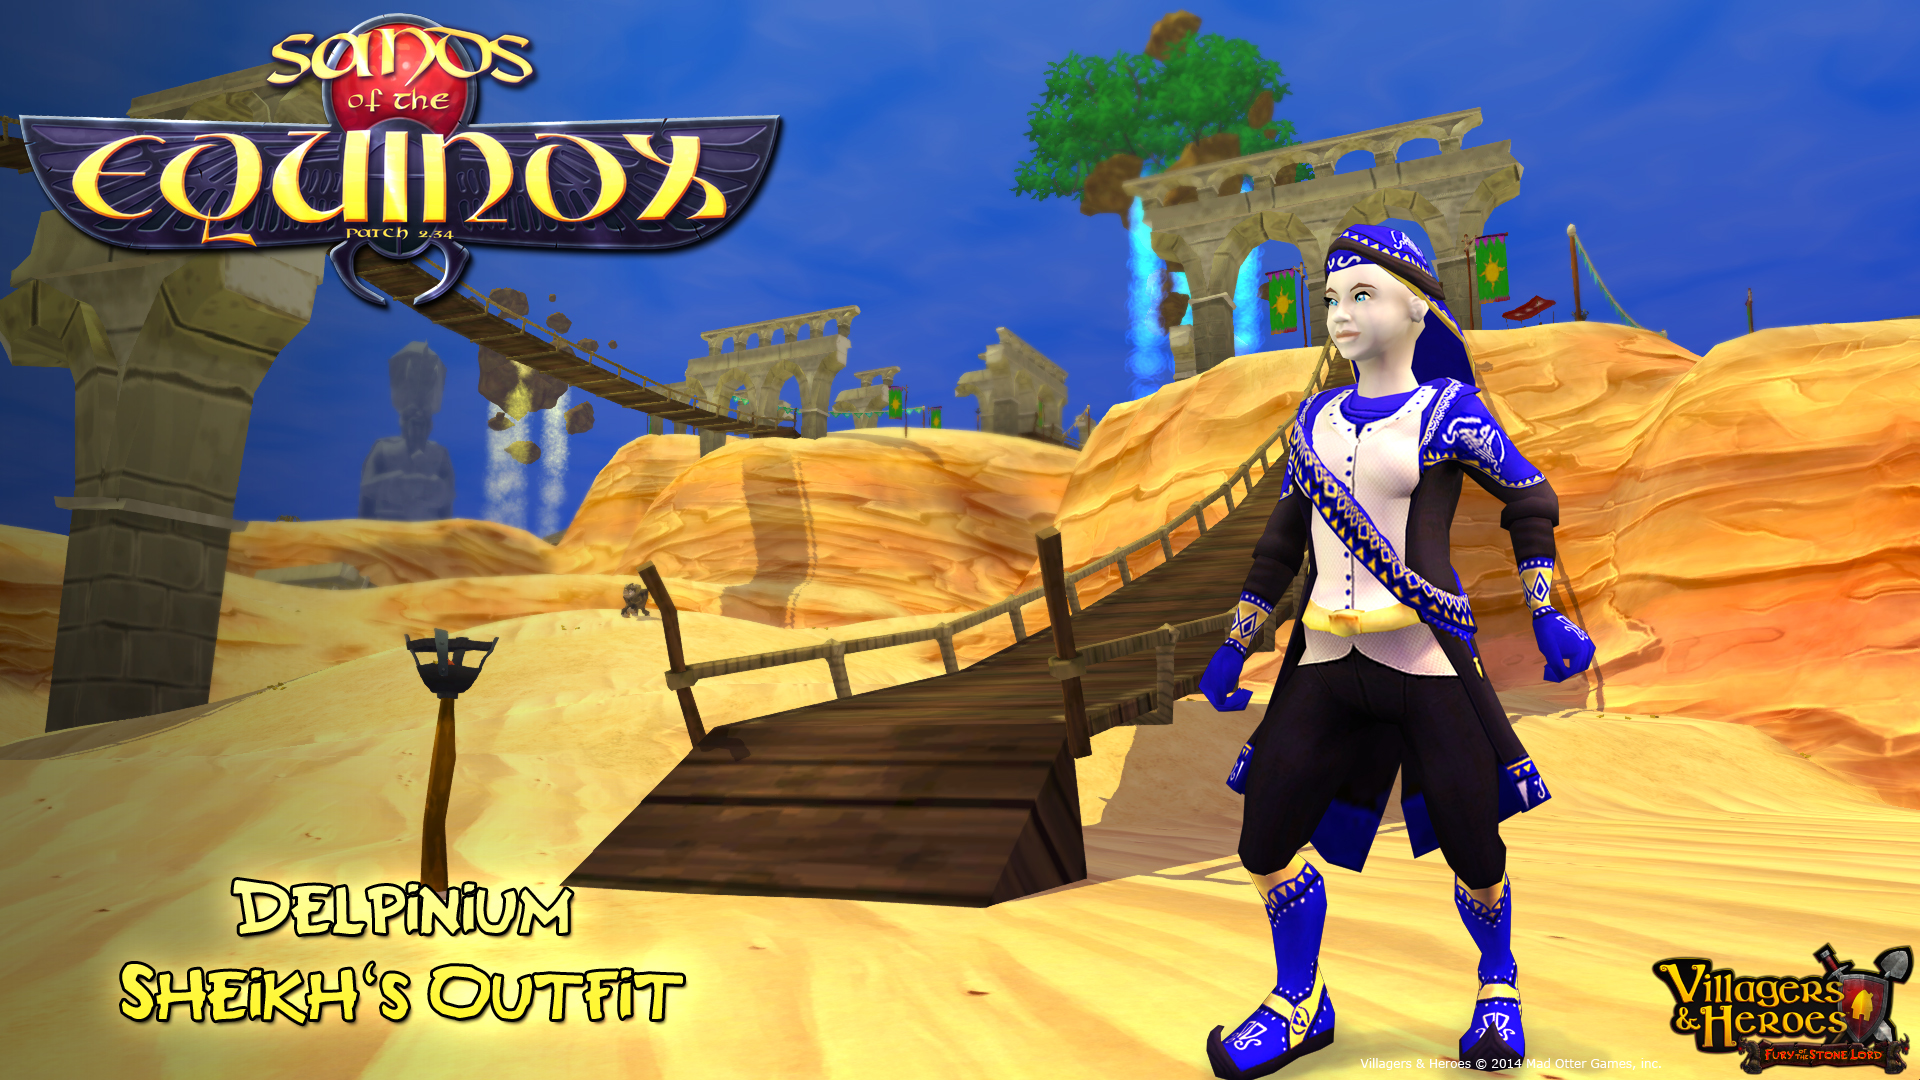 Villagers and Heroes: Sands of the Equinox screenshot